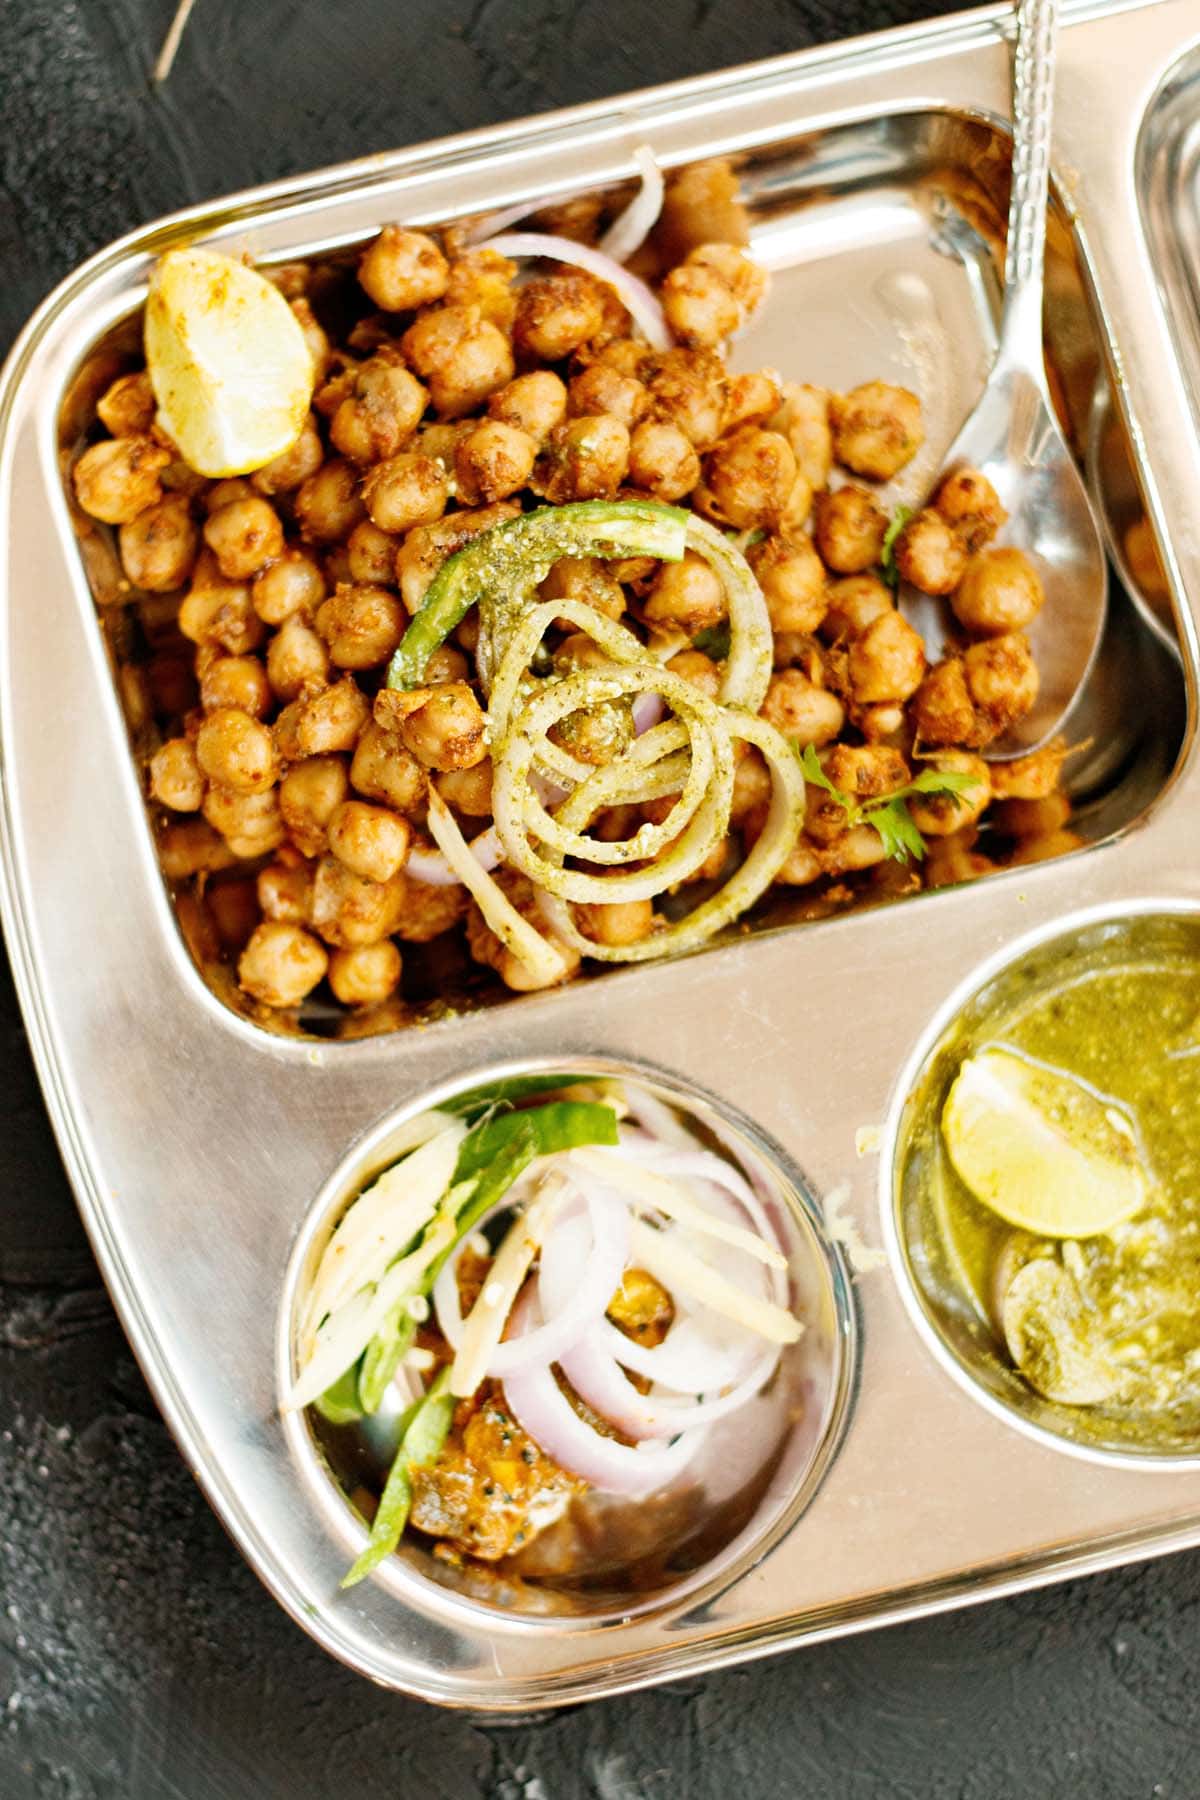 pindi chole served in a partitioned square tray with onion slices and lemon wedge on top with other partitions filled with onions, green chillies, mango pickle, lemon wedge and green chutney